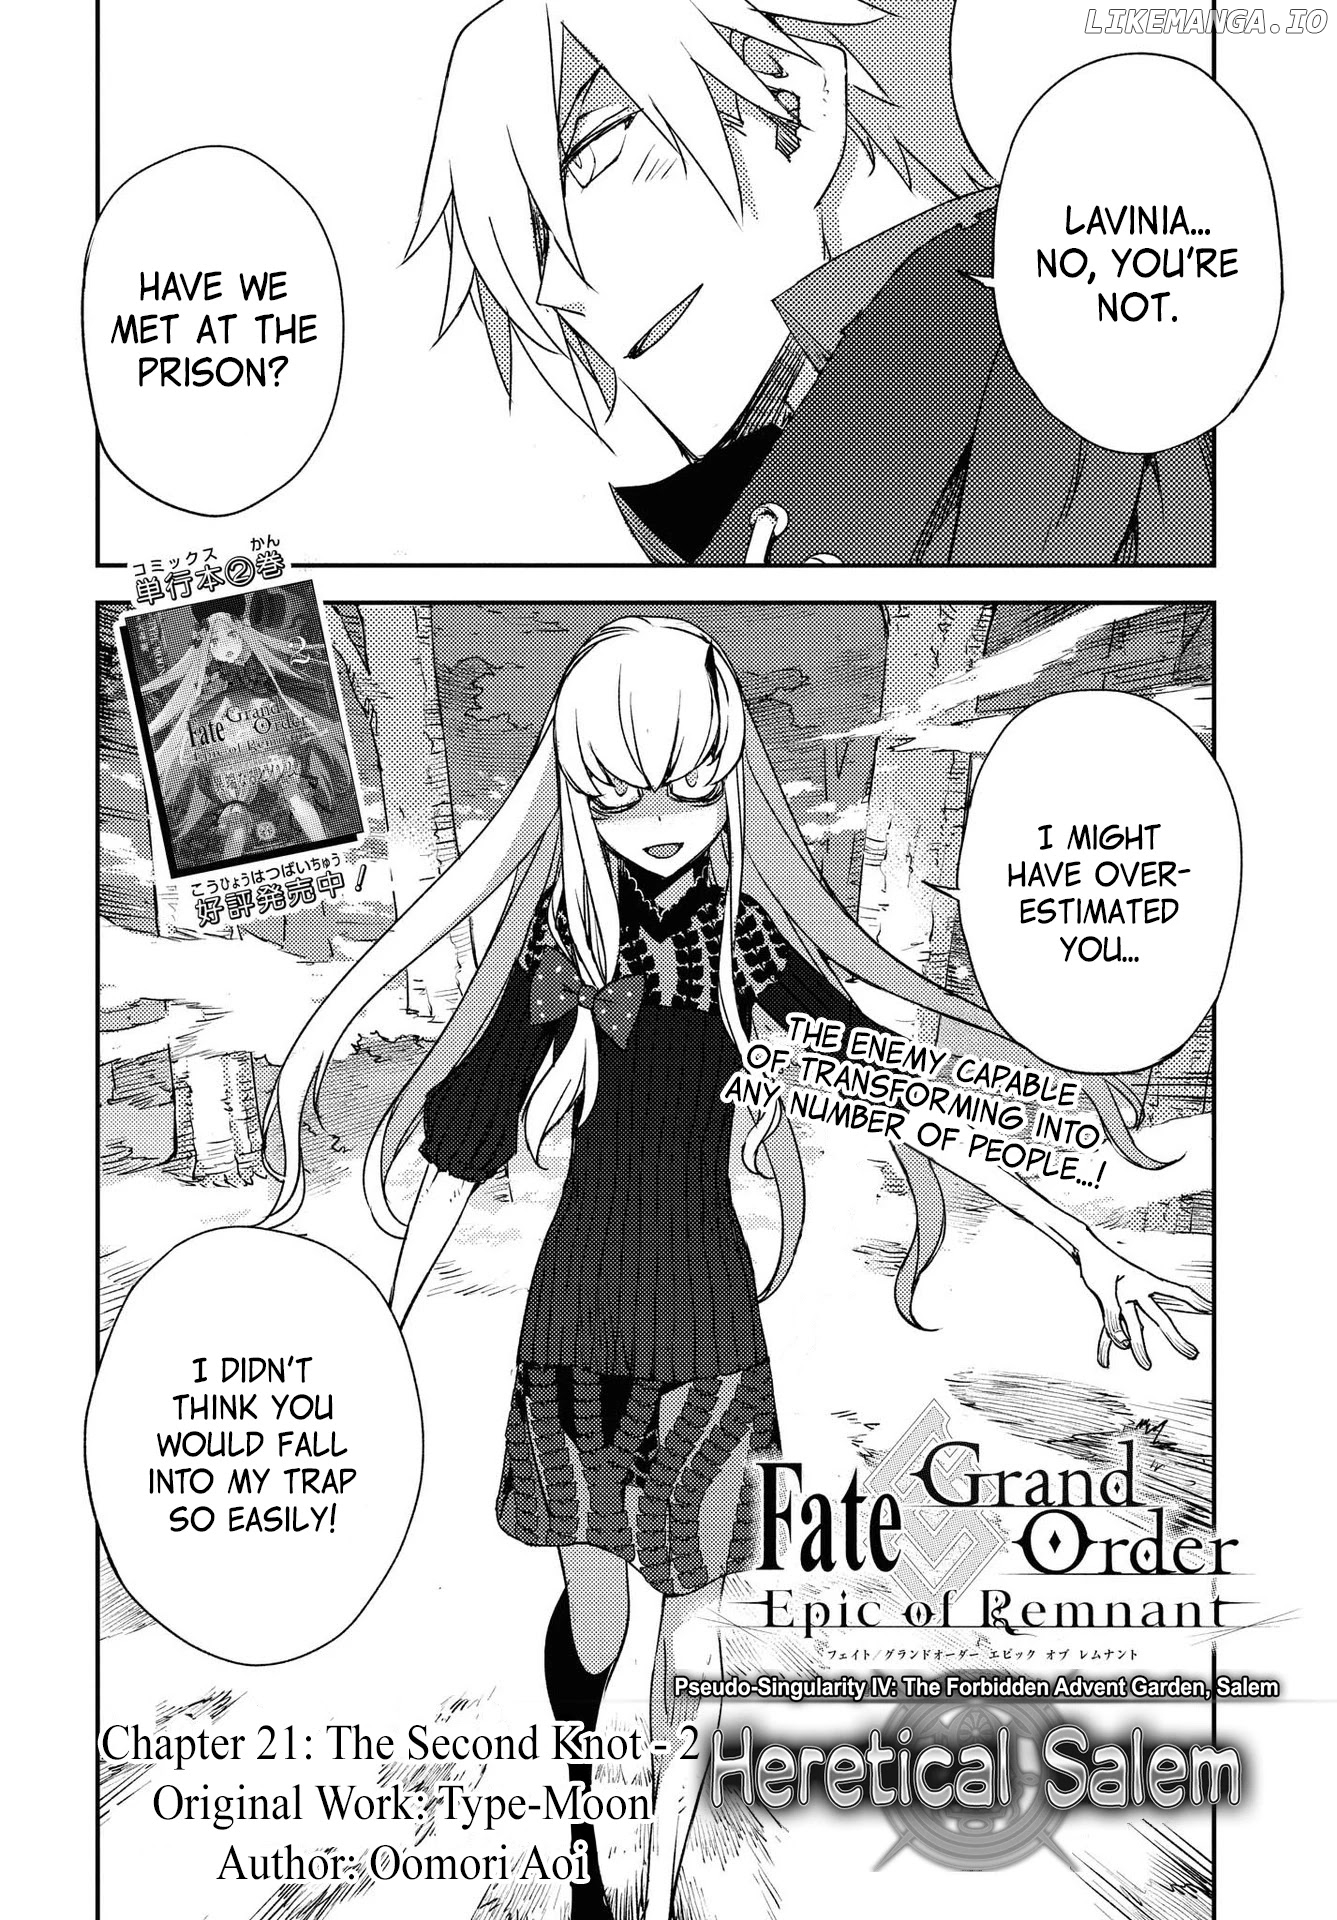 Fate/Grand Order: Epic of Remnant - Subspecies Singularity IV: Taboo Advent Salem: Salem of Heresy chapter 21 - page 4